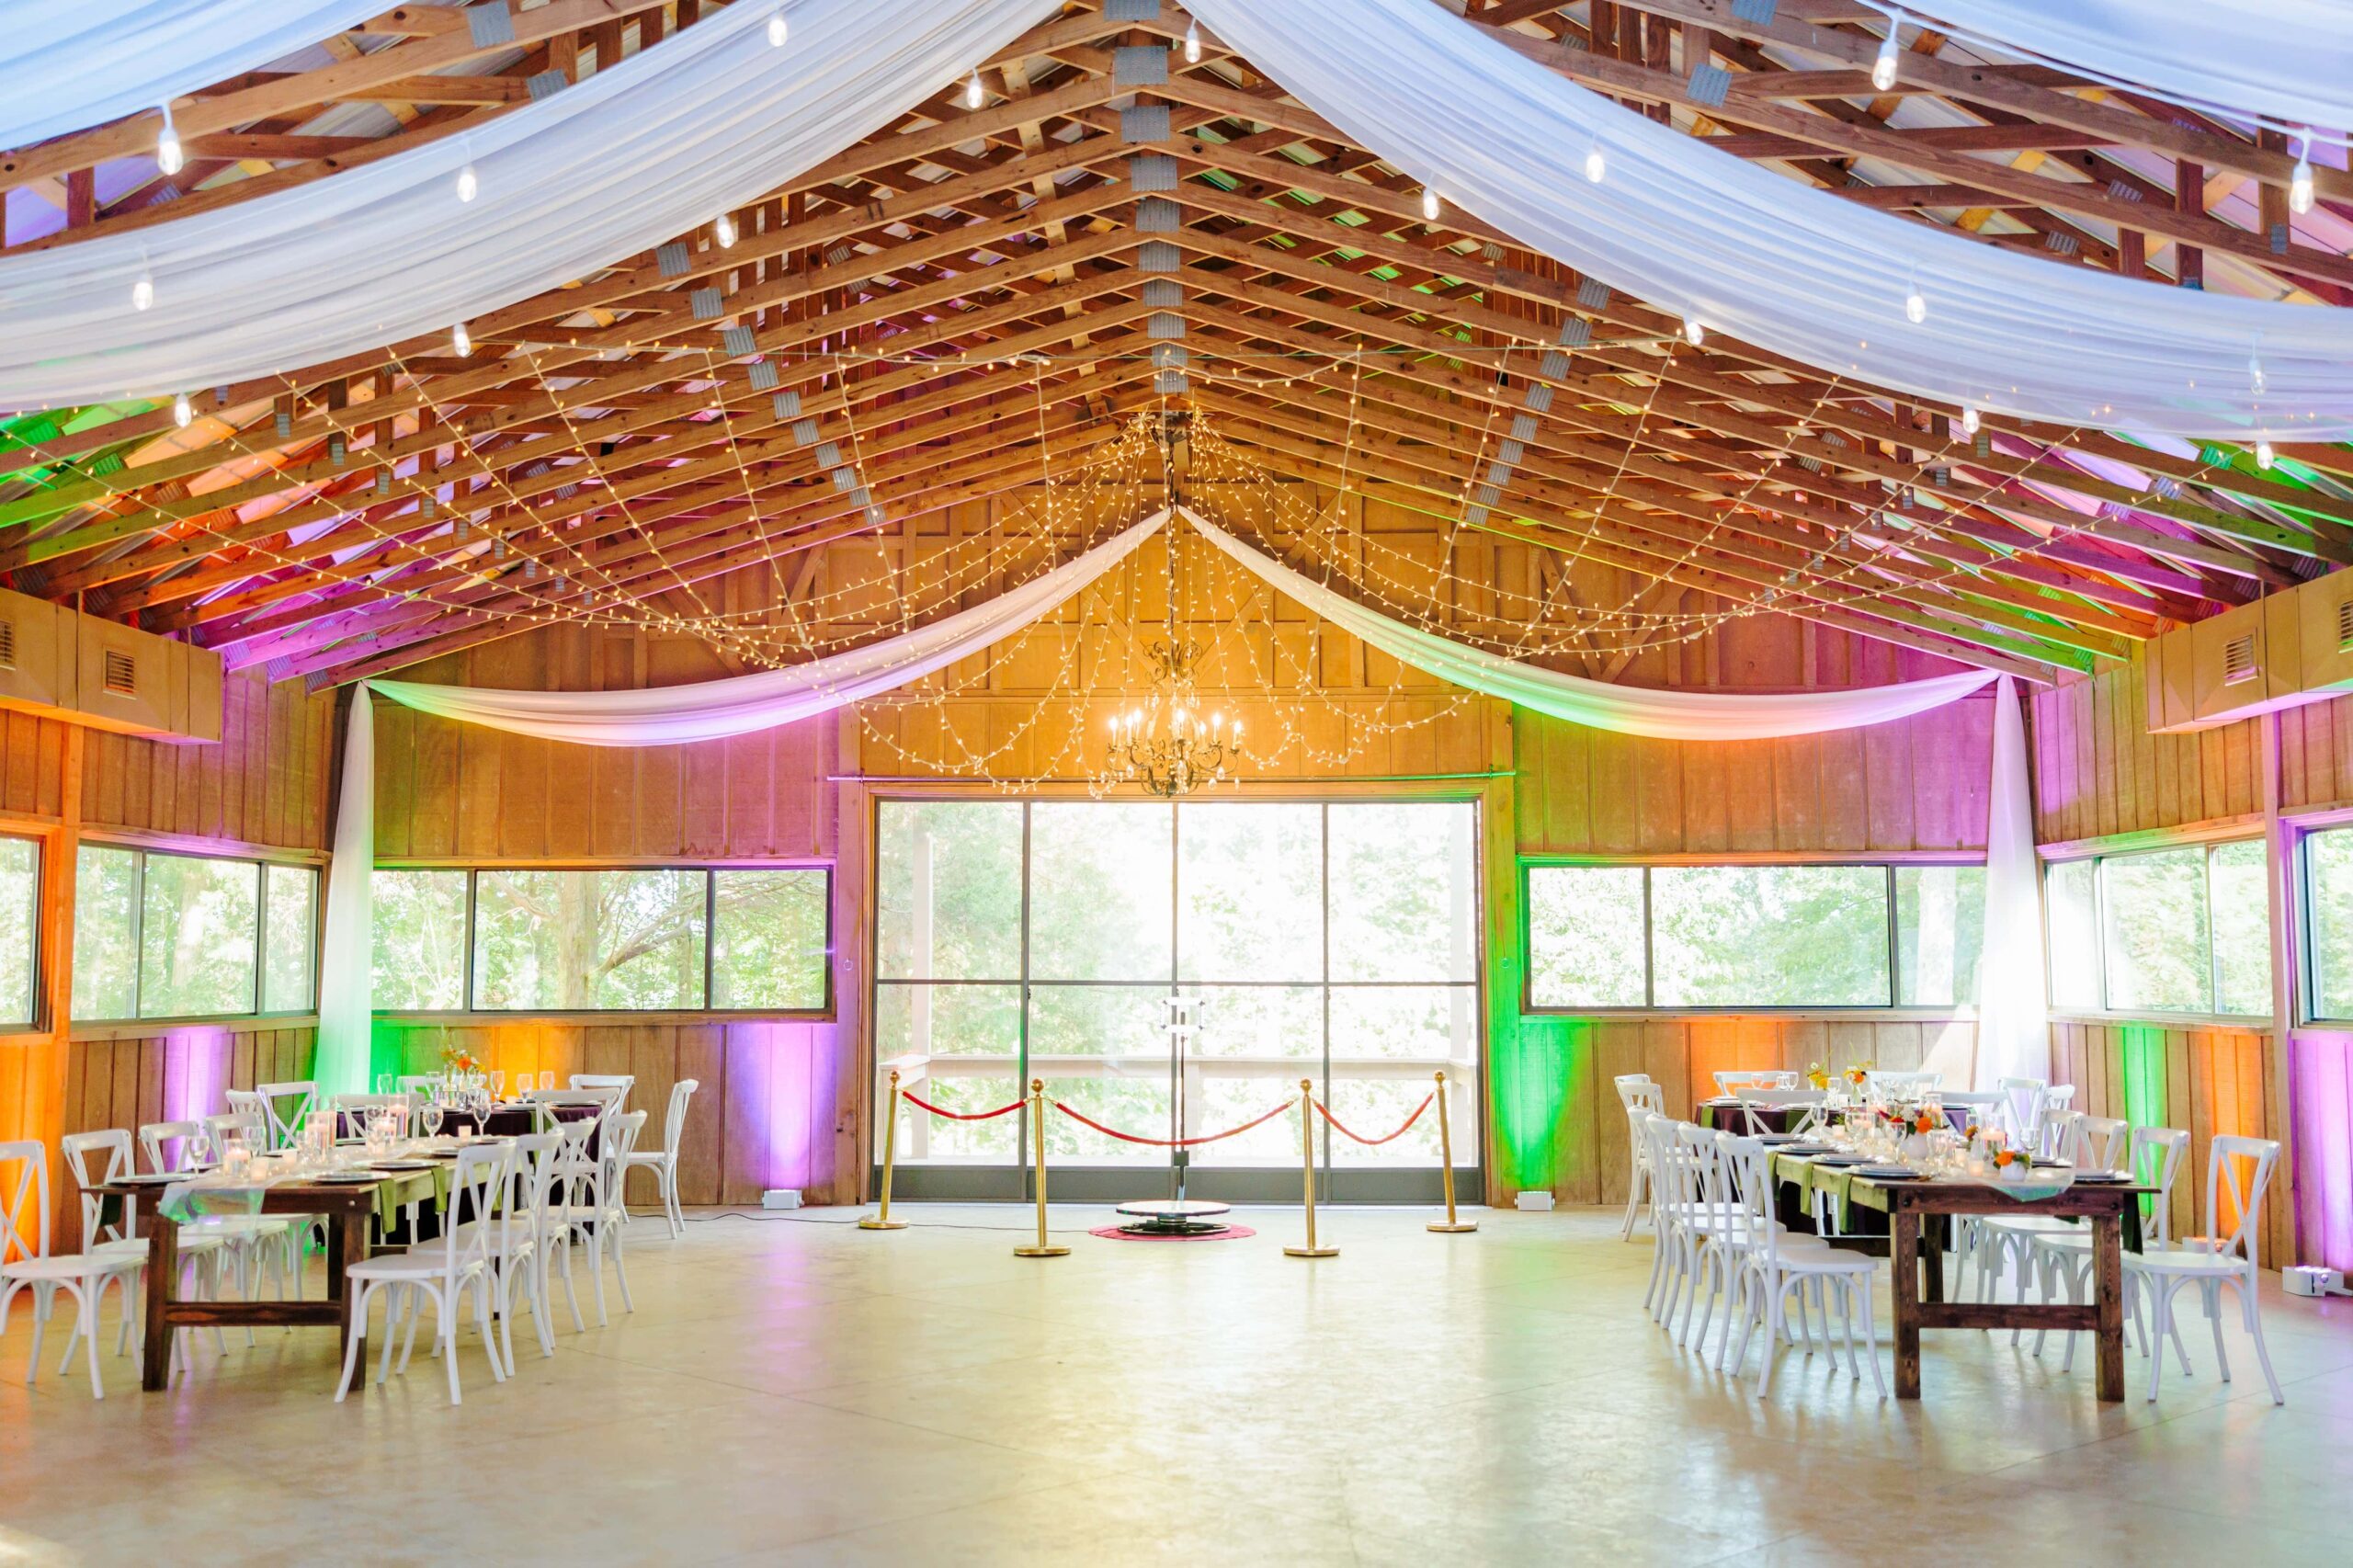 The large wedding hall has different colored lights lighting up the walls on all sides to keep with the disco theme.